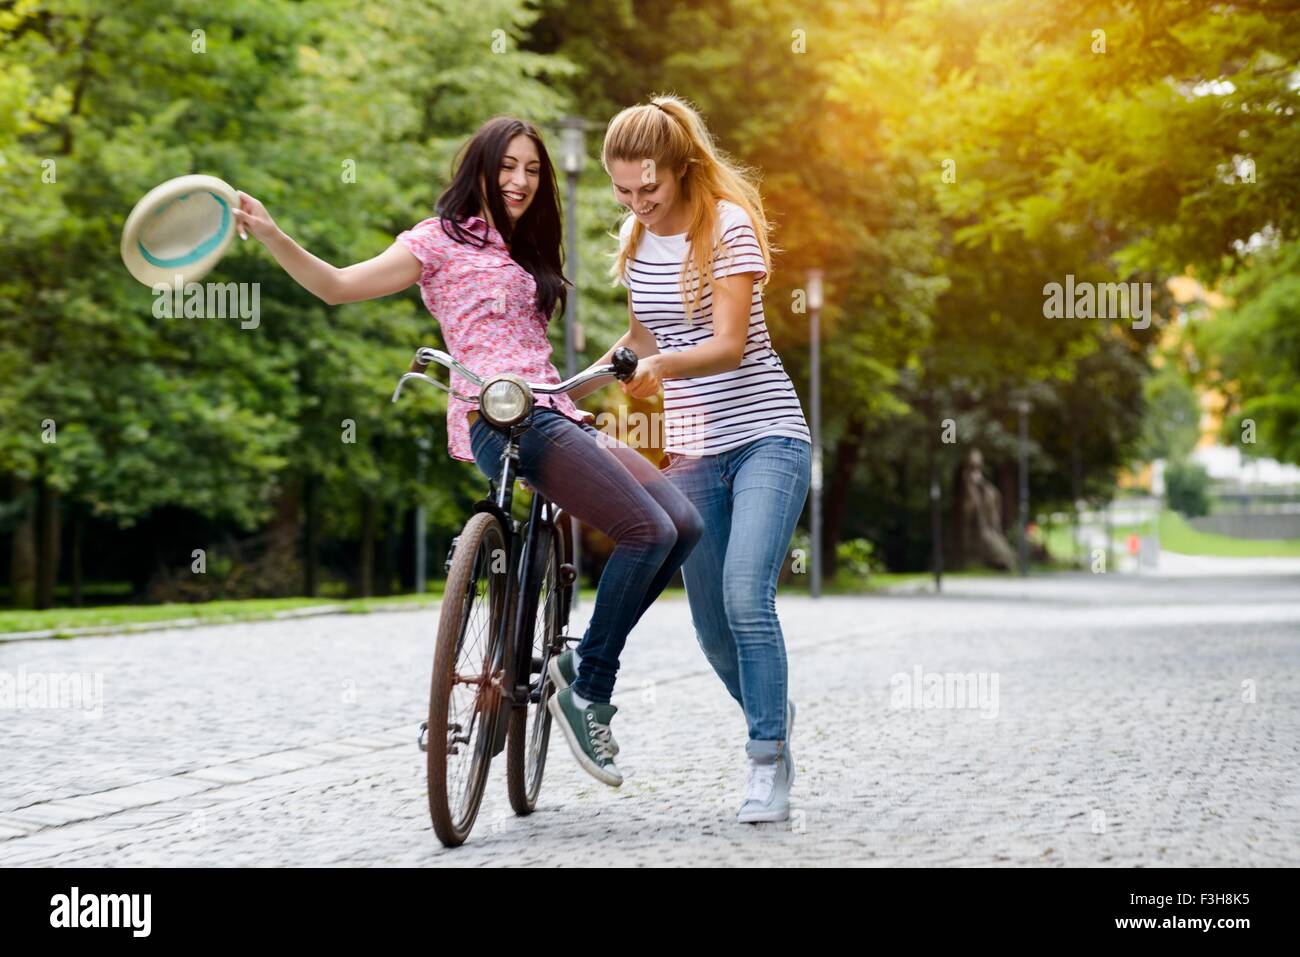 Young woman holding hat riding side saddle on bicycle with friend pushing Stock Photo